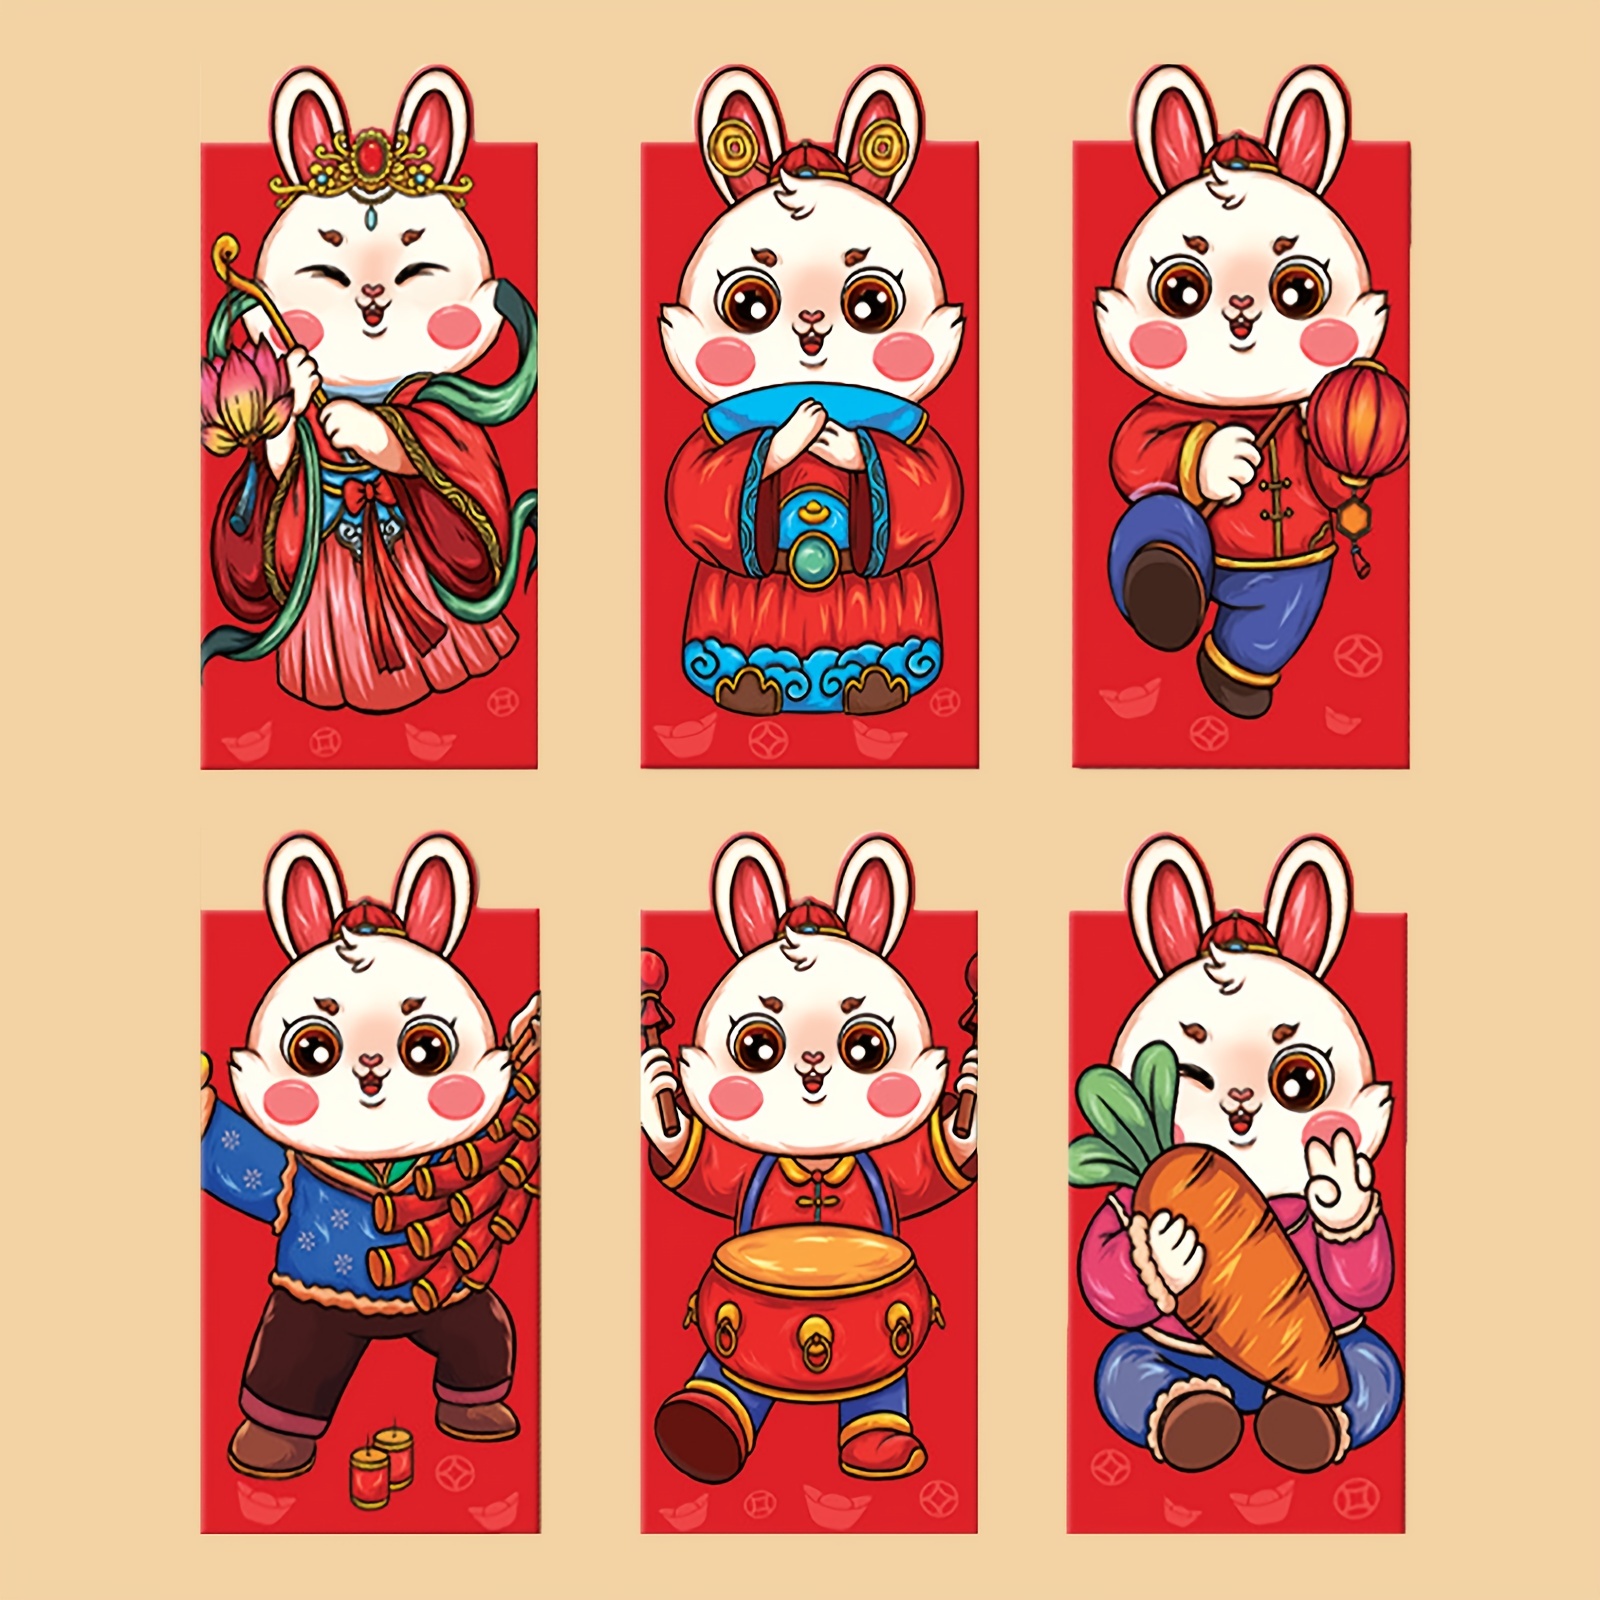 12 Chinese New Year of the Rabbit 2023 Lion Dance Red Envelopes